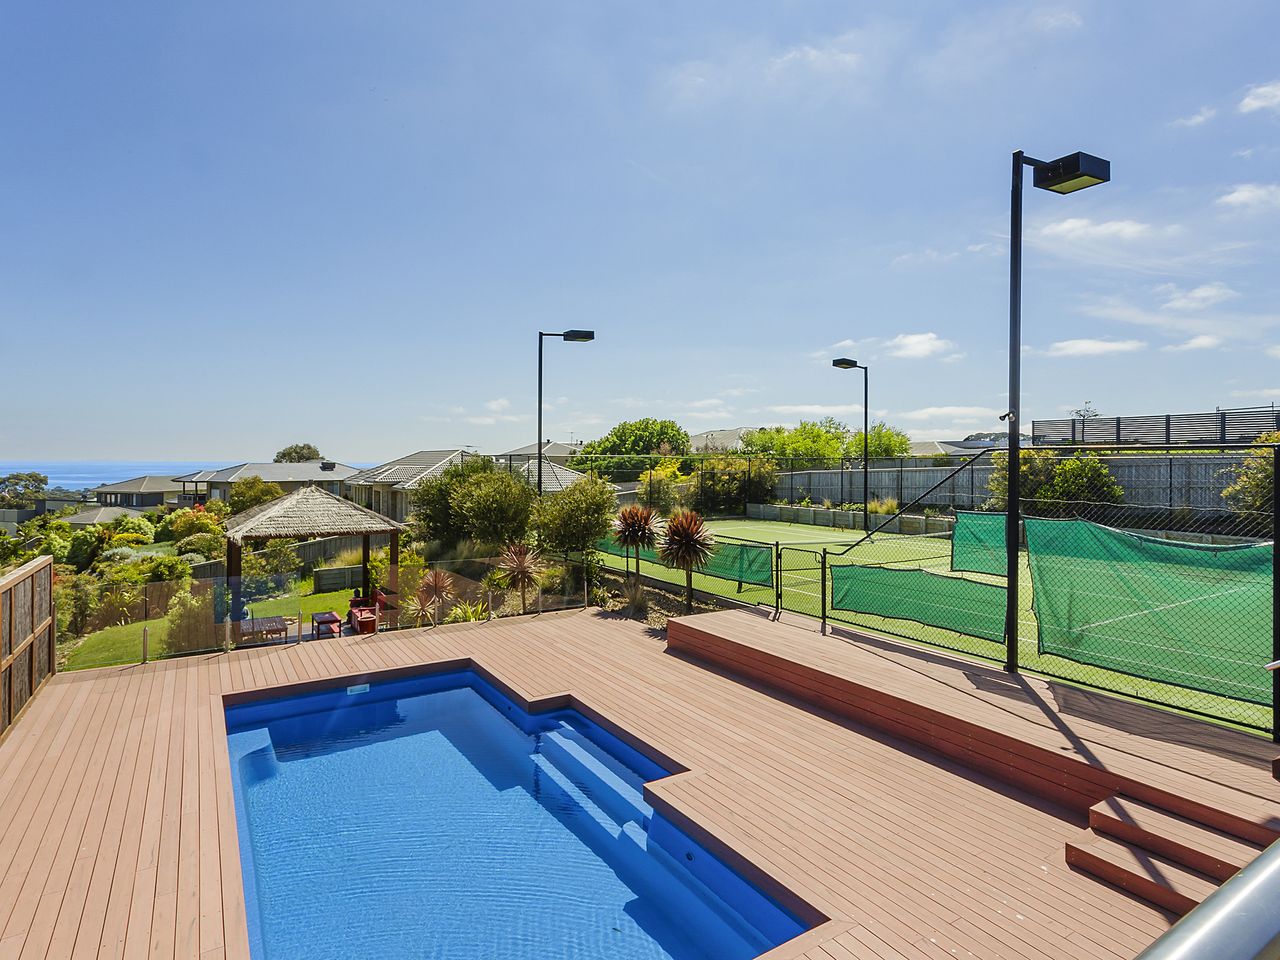 Property Image 1 - Outdoor Fun In The Sun - Swimming Pool and Tennis Court